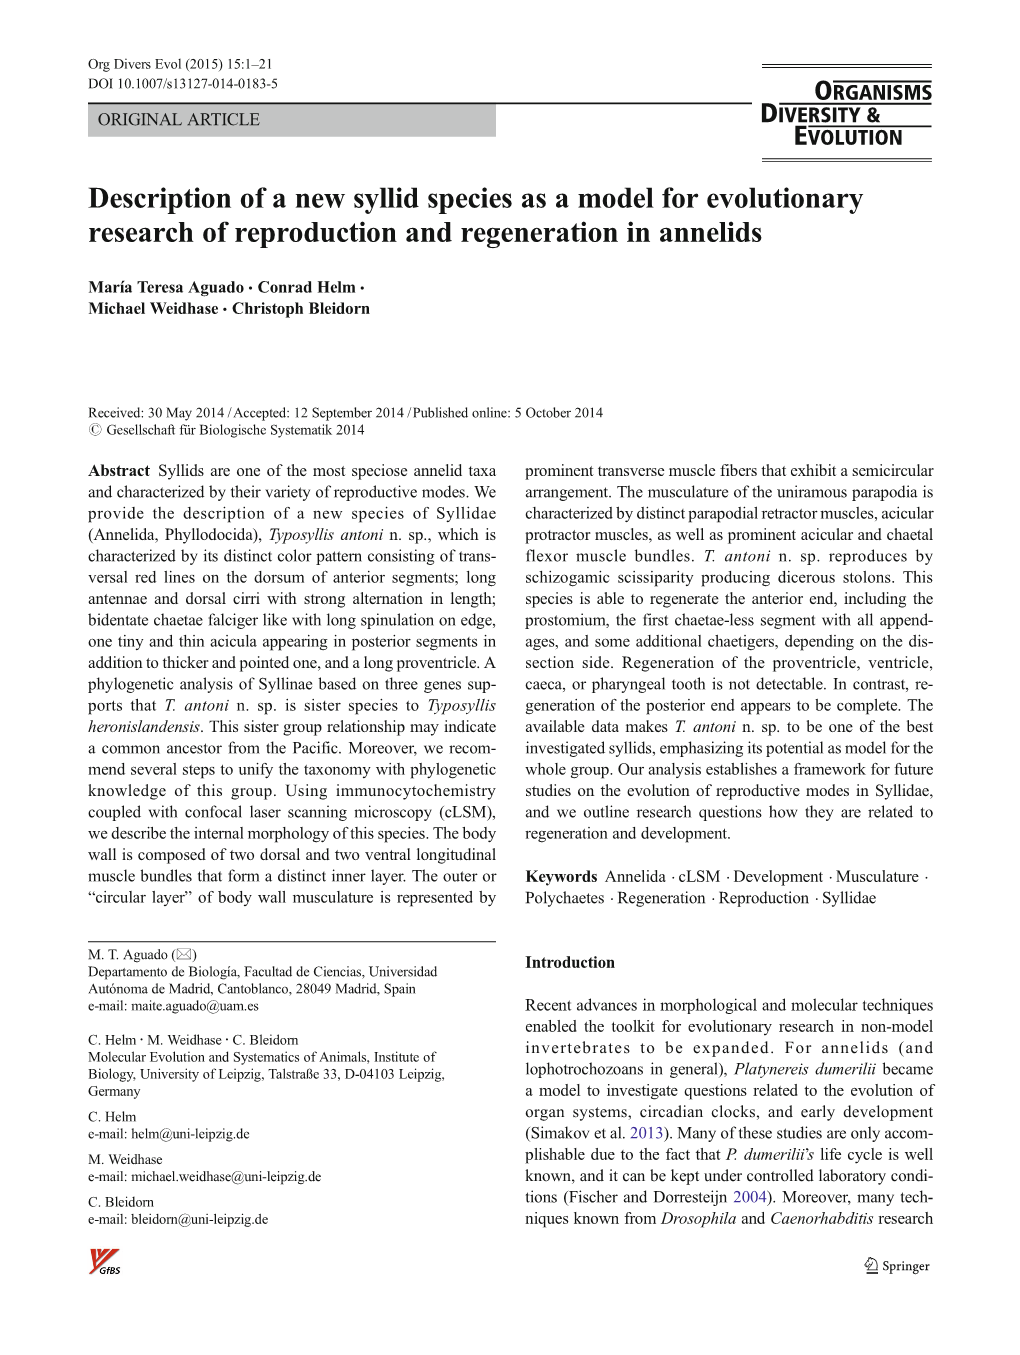 Description of a New Syllid Species As a Model for Evolutionary Research of Reproduction and Regeneration in Annelids